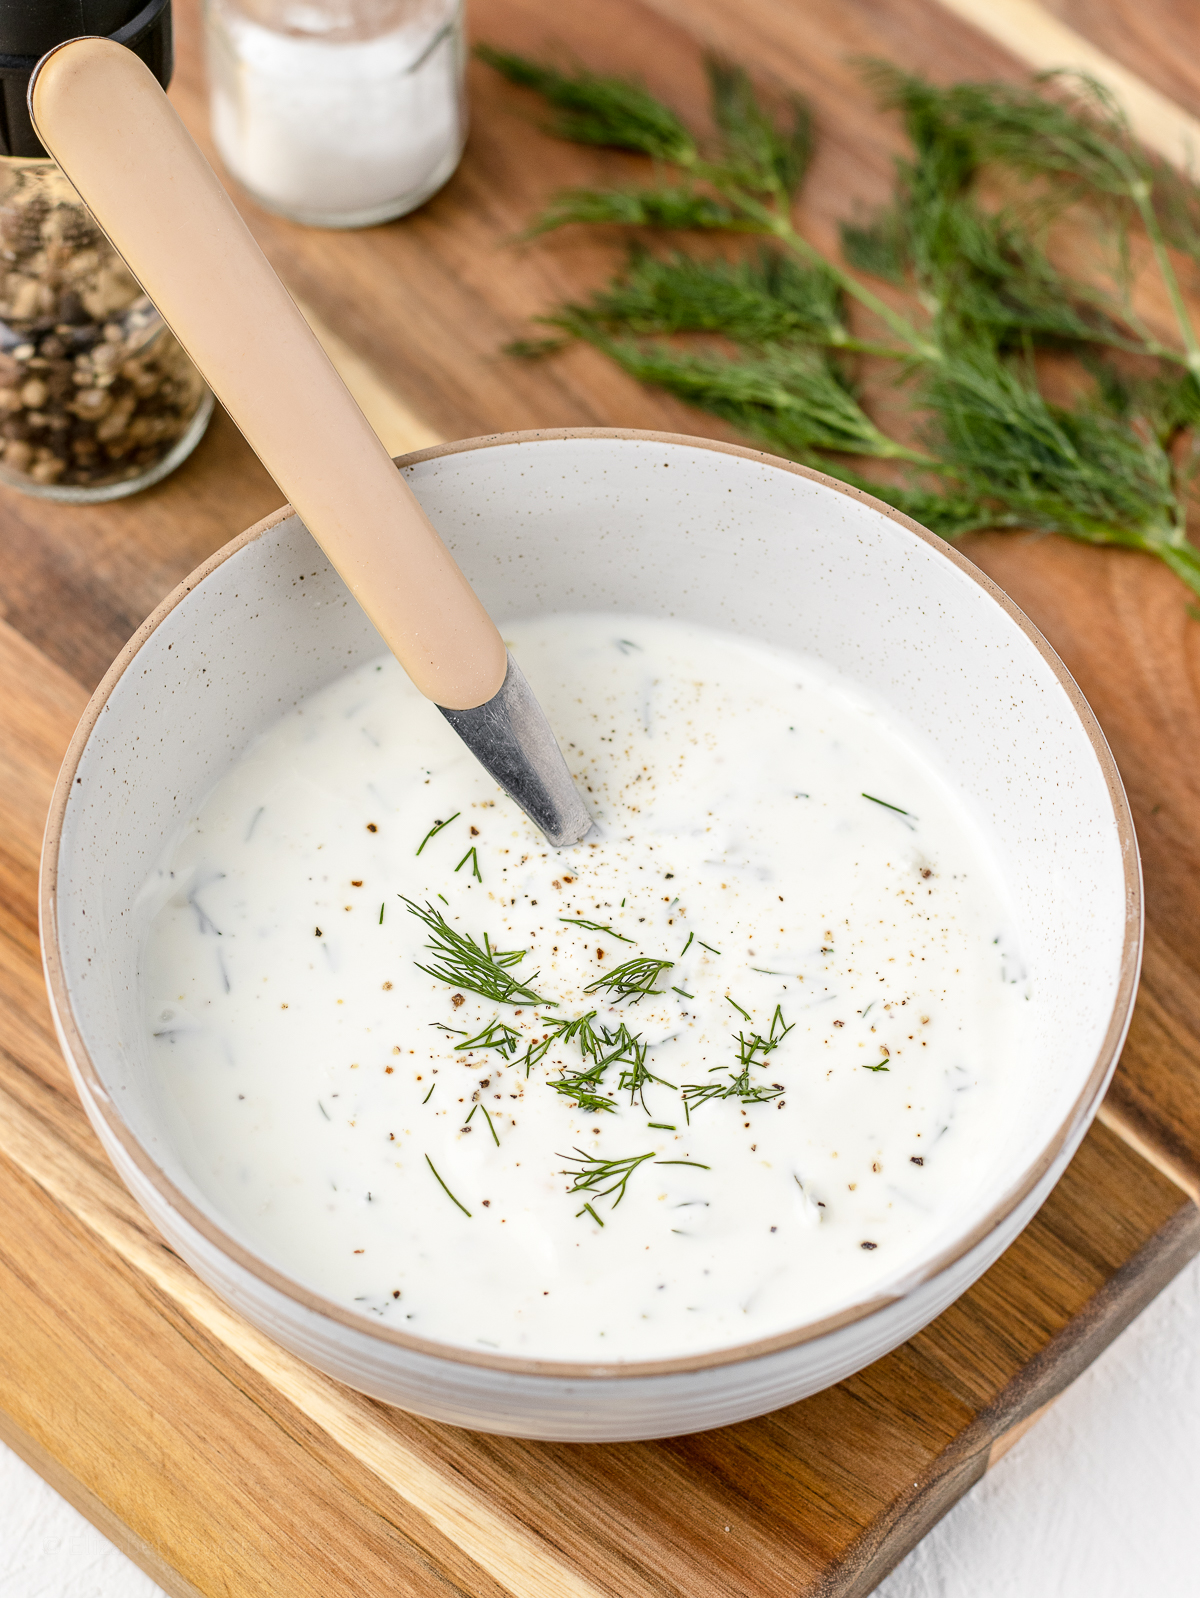 Bowl of Dill Sauce with a spoon, ready to serve out.